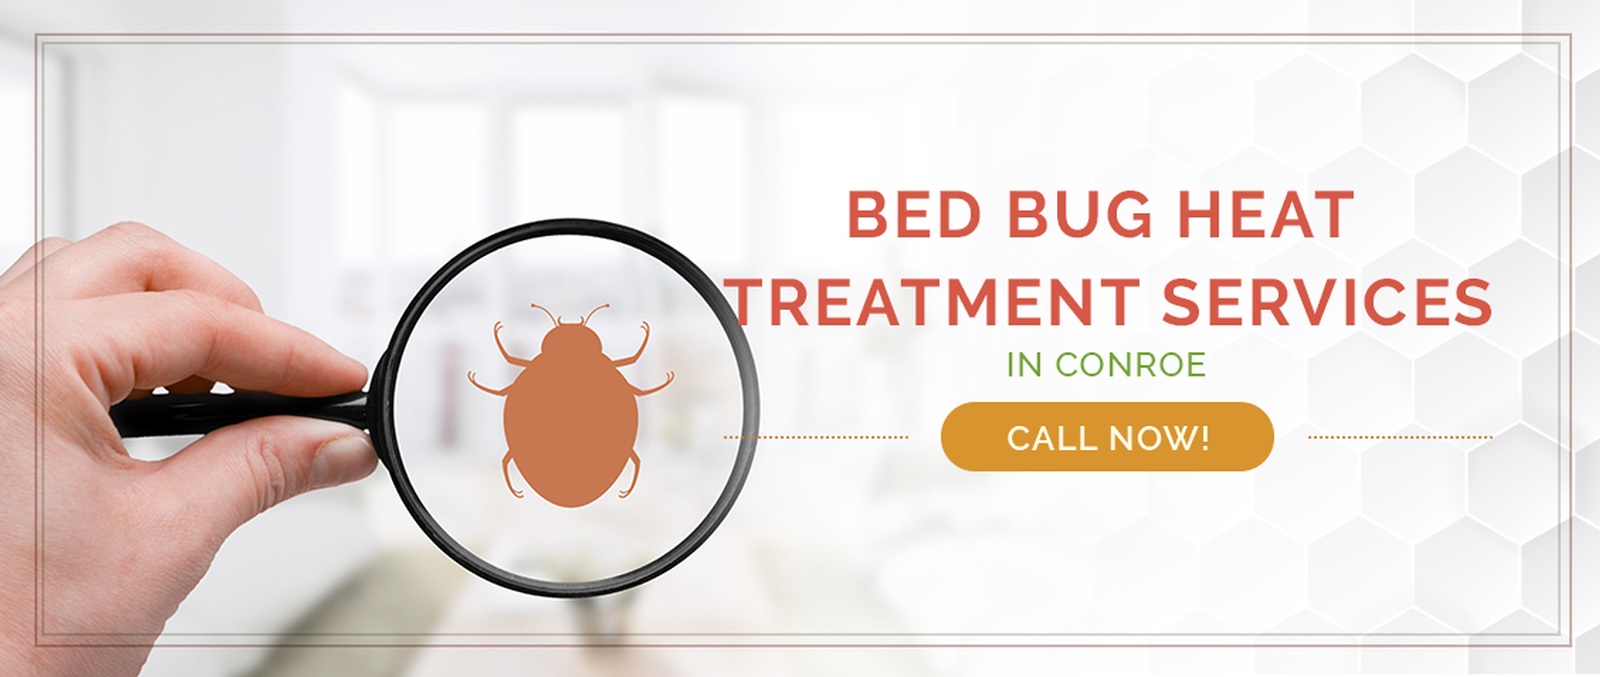 Conroe Bed Bug Treatment / Heater Rental Services by Houston Bed Bug Heaters